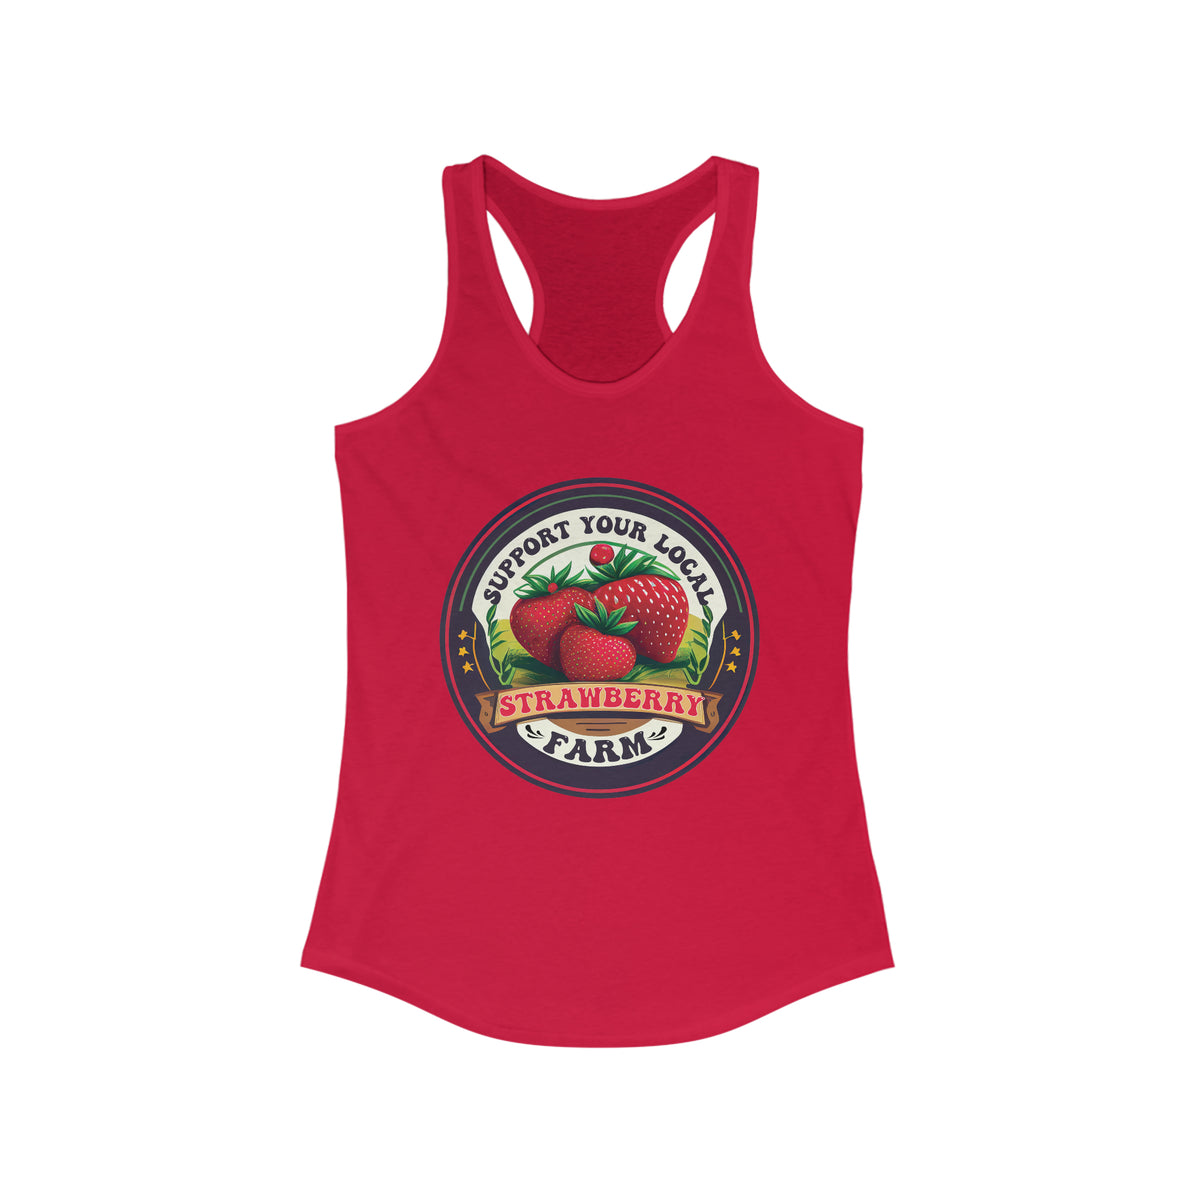 Support Your Local Strawberry Farm Shirt | Strawberry Shirt | Aesthetic Fruit Shirt | Cute Farm Gifts | Women's Slim Fit Racerback Tank